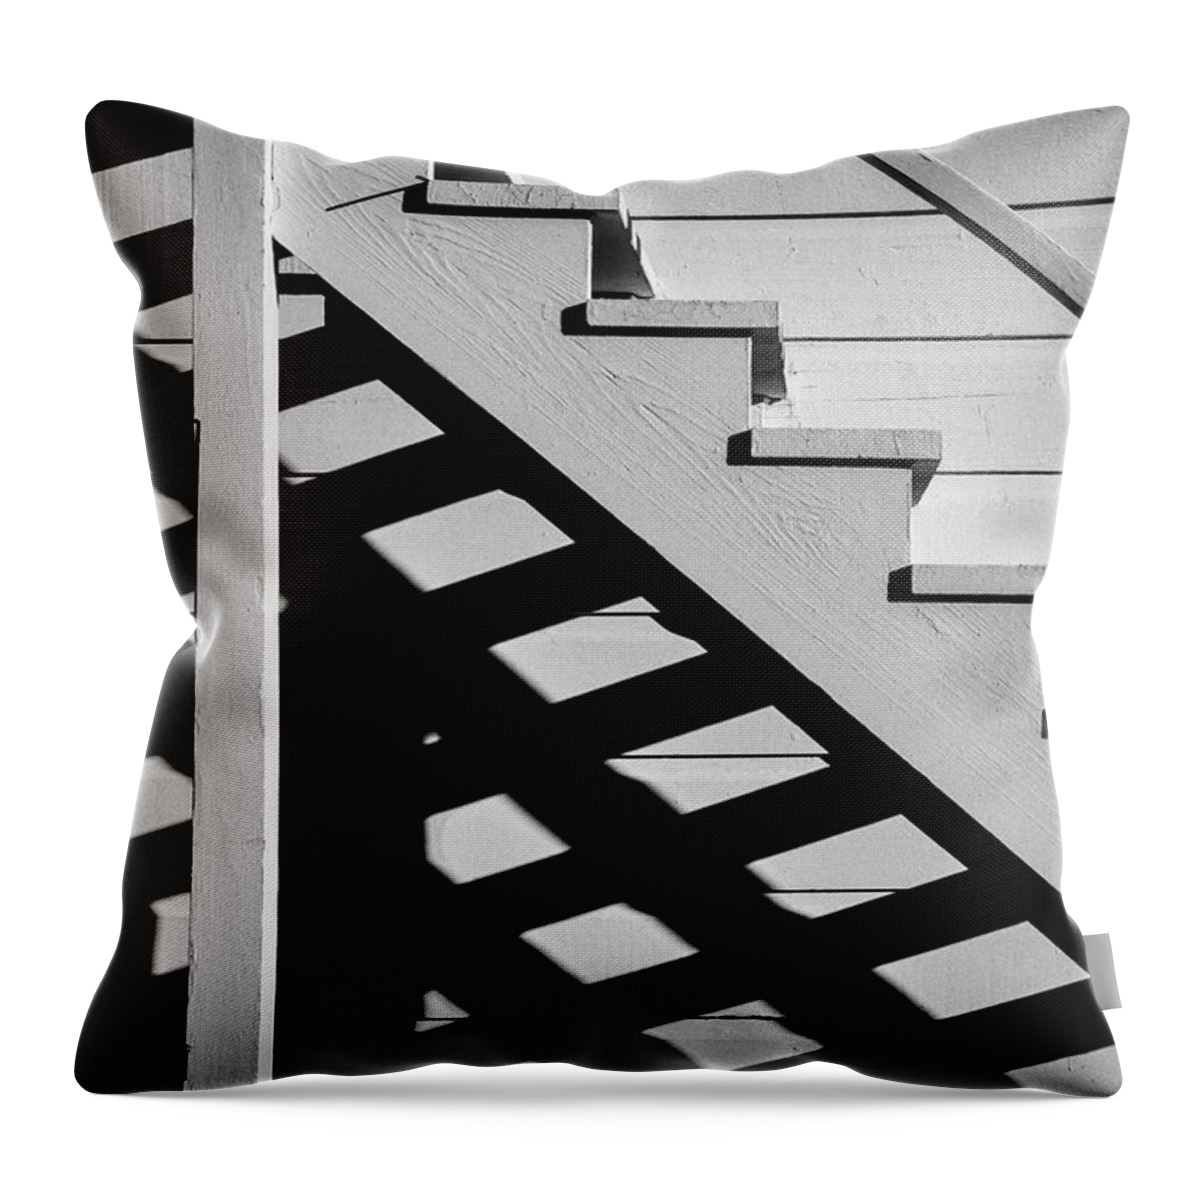 Stairs Throw Pillow featuring the photograph Wooden Stairs by Garry Gay